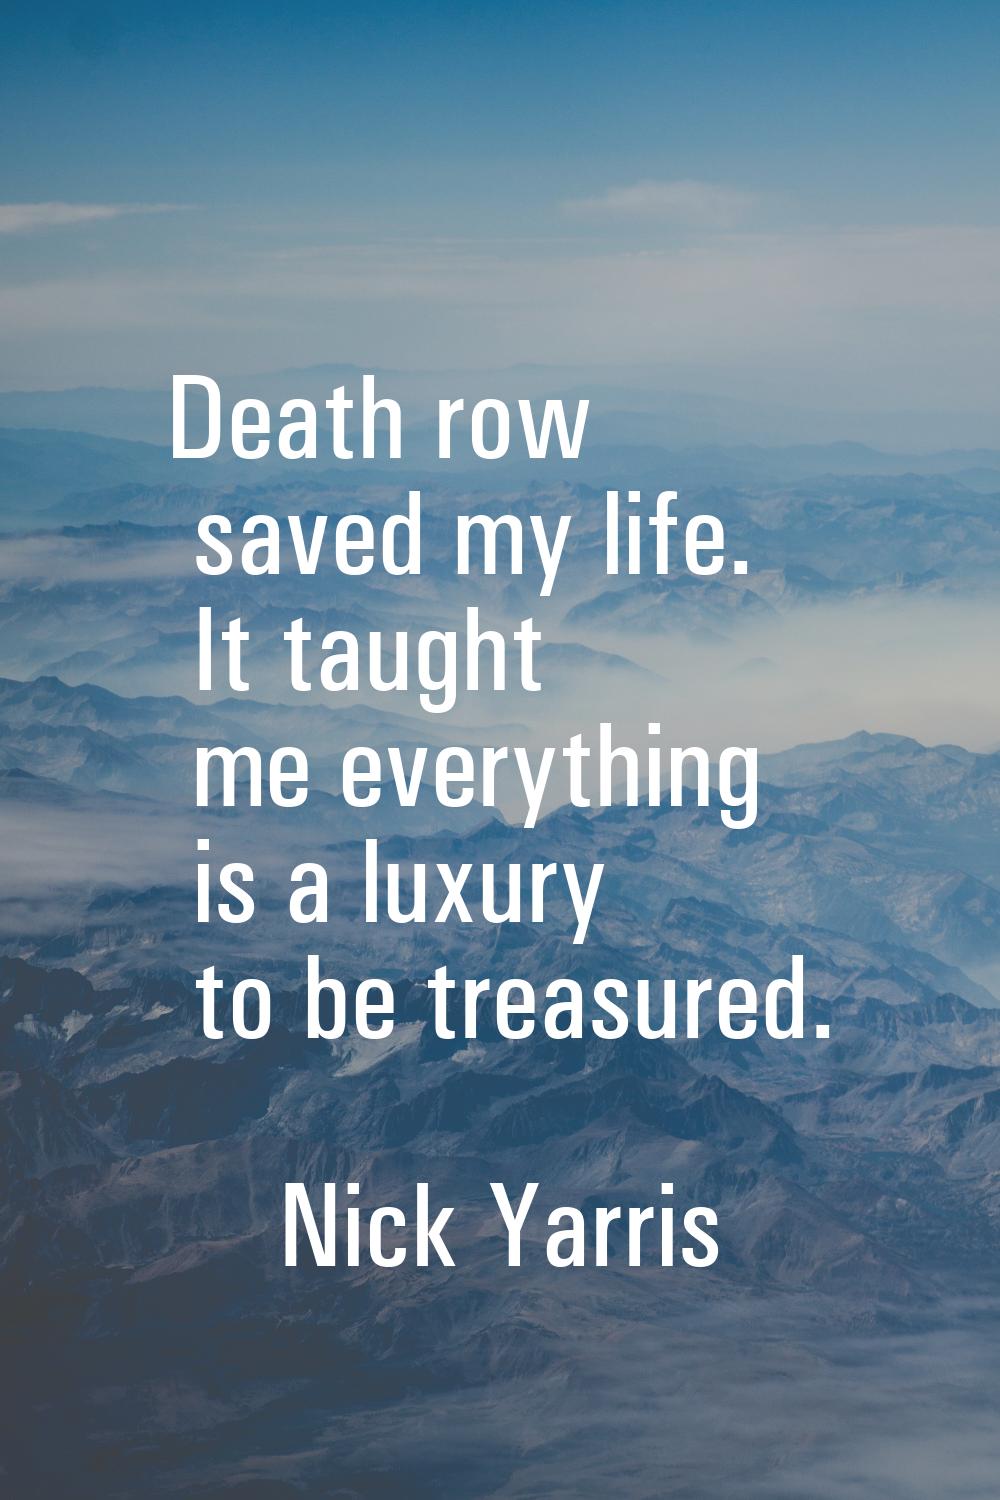 Death row saved my life. It taught me everything is a luxury to be treasured.